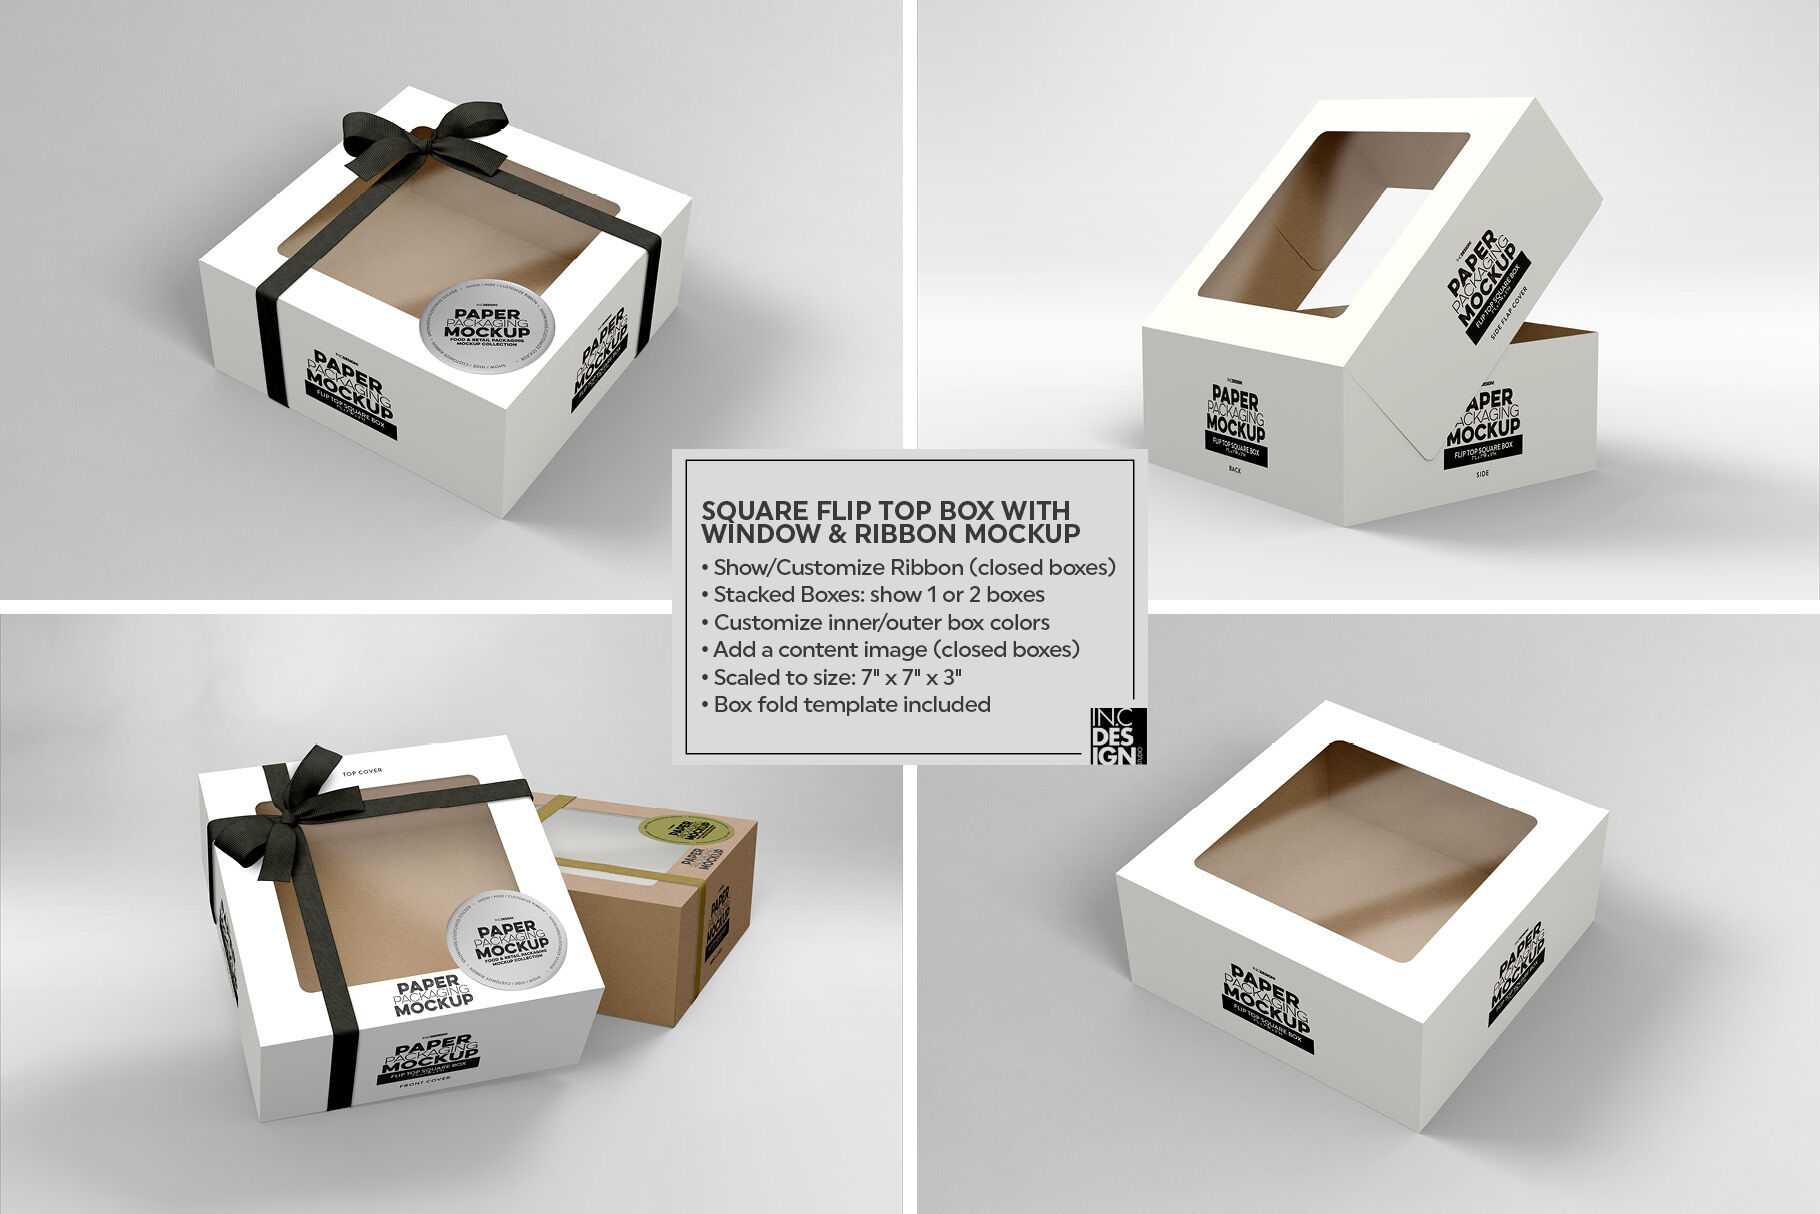 Mid-autumn moon cake packaging box design template image_picture free  download 401580326_lovepik.com